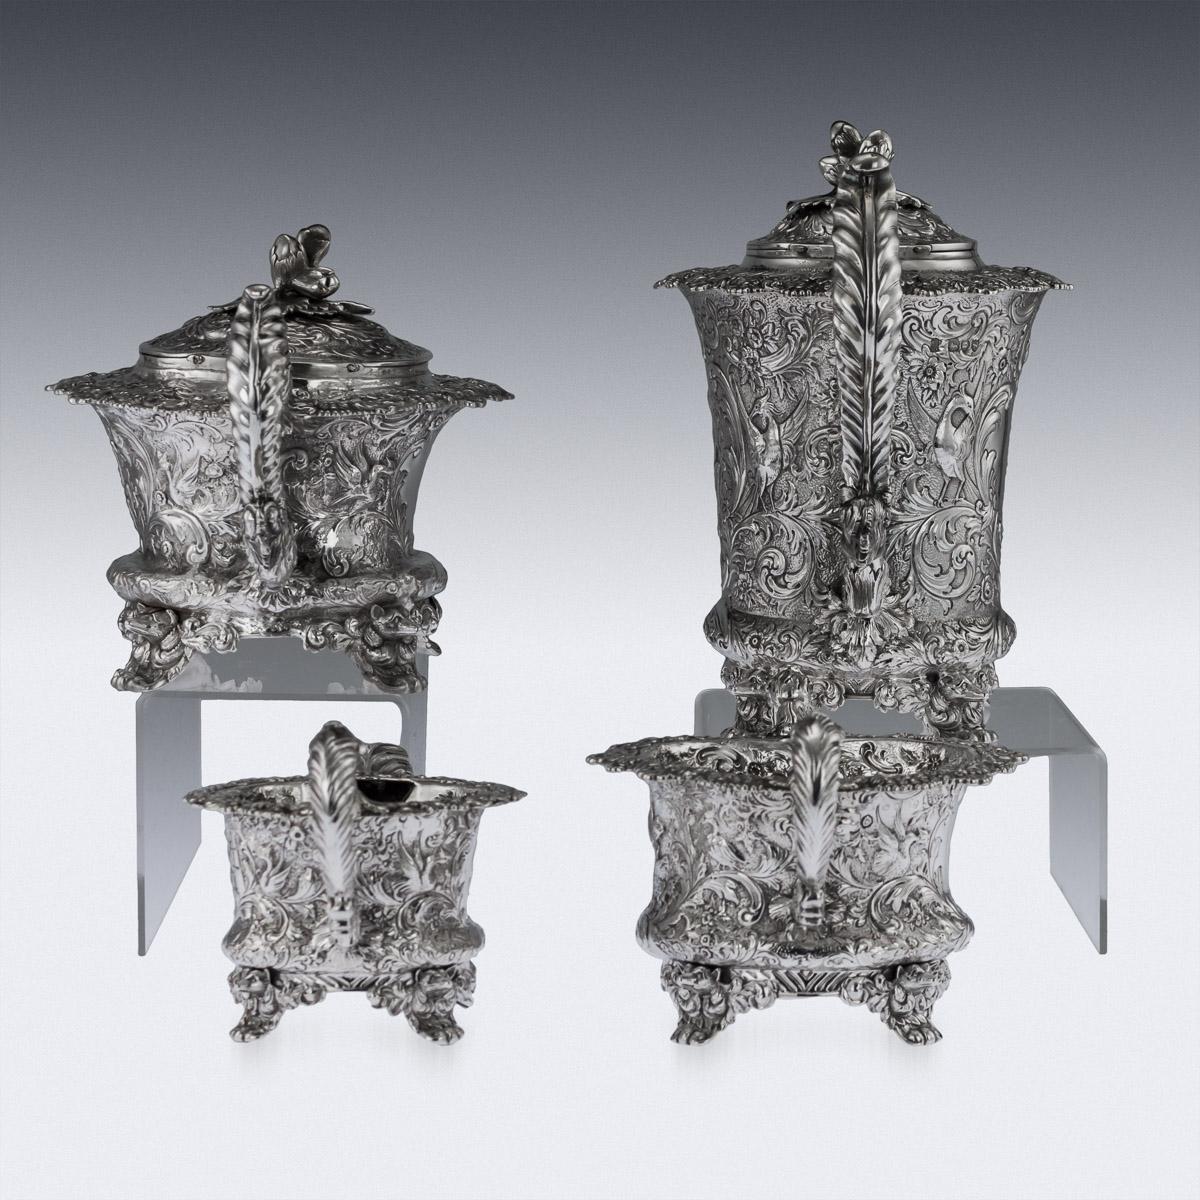 Antique 19th century Georgian / Victorian solid silver four-piece tea and coffee set, comprising of a coffee pot, tea pot, sugar bowl and cream jug, each elaborately chased body resting on four cast leaf feet mounted with foxes heads, the body